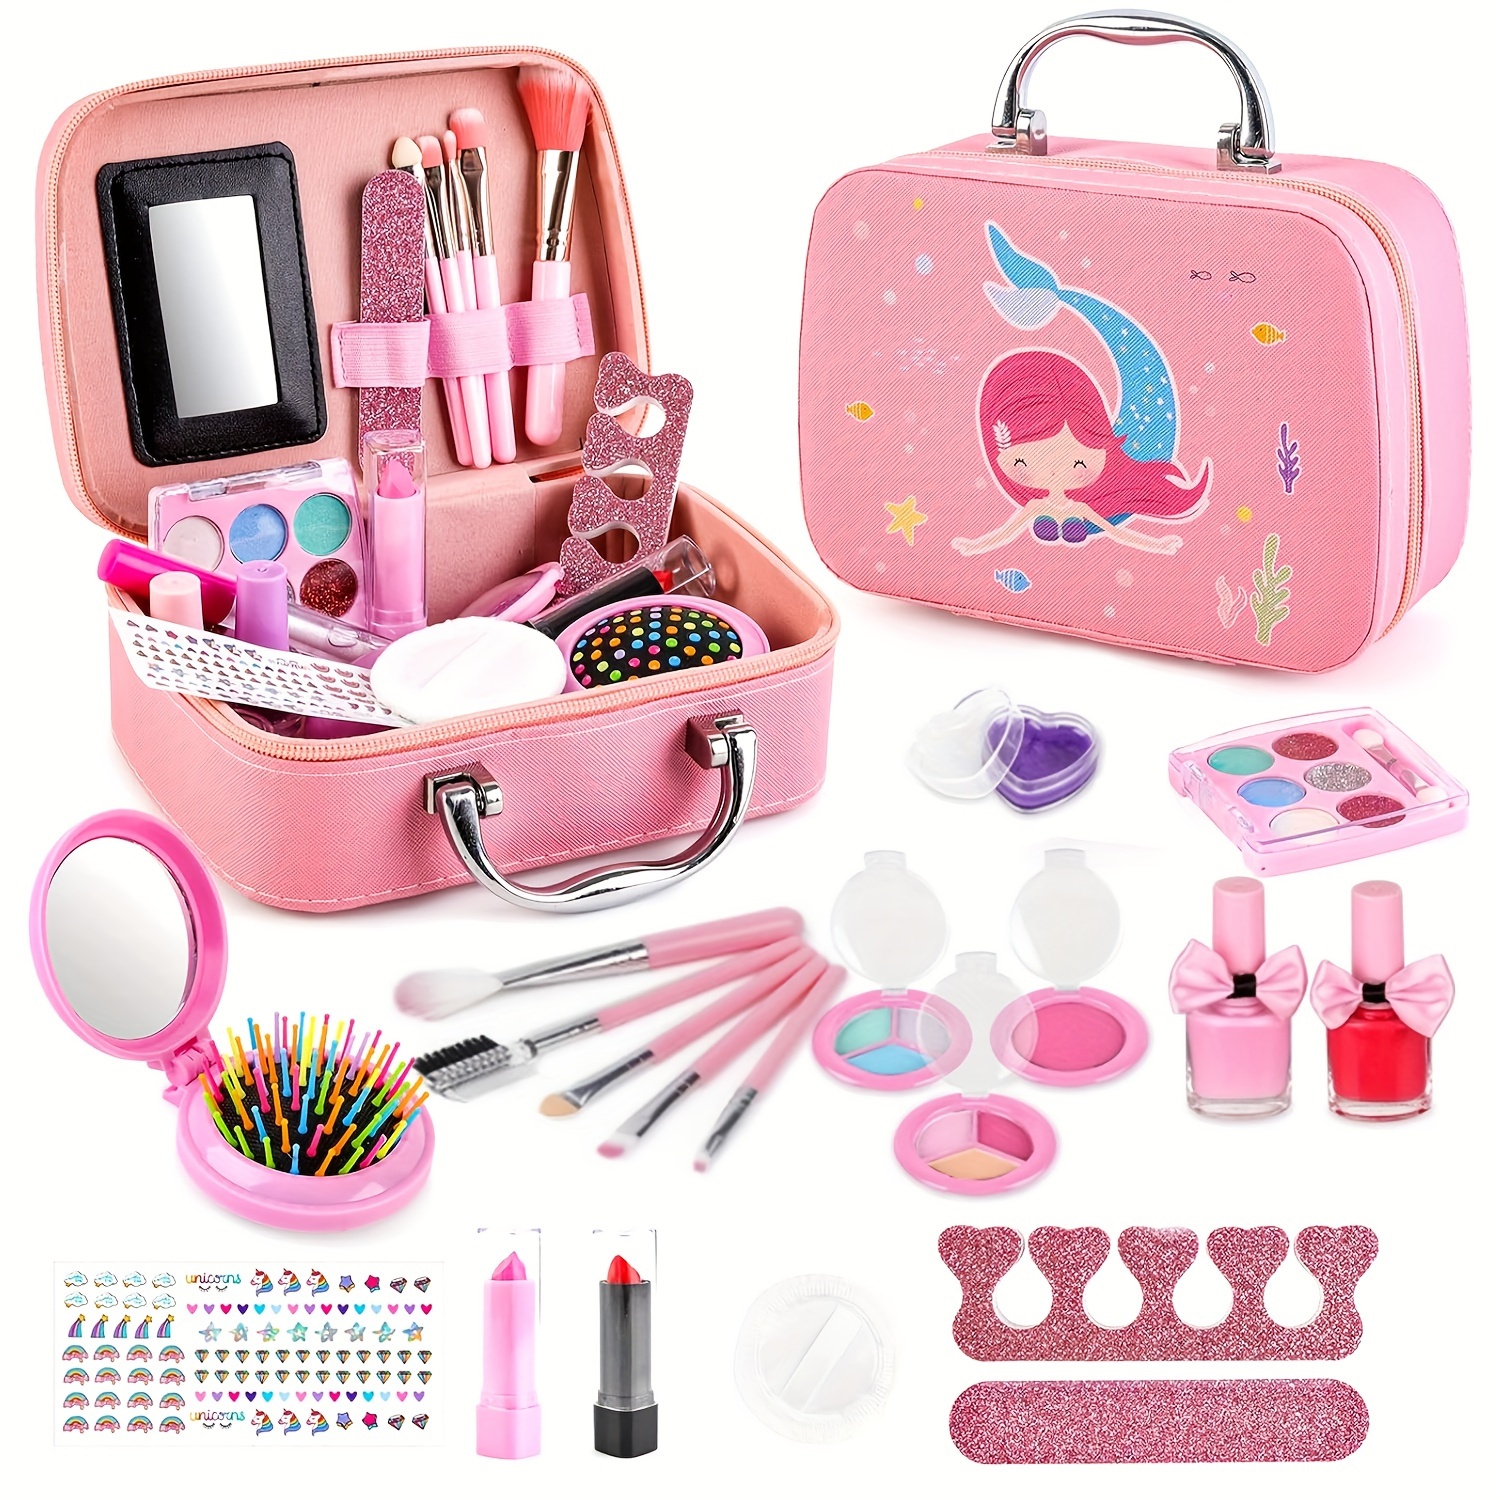 

Makeup Kit For Girl With Makeup Bag, Real, Non Toxic, Washable Makeup Kits, Christmas, Birthday Gifts For Little Princess Cosplay Vanity Kits, Ideal For Mother's Day Makeup Set